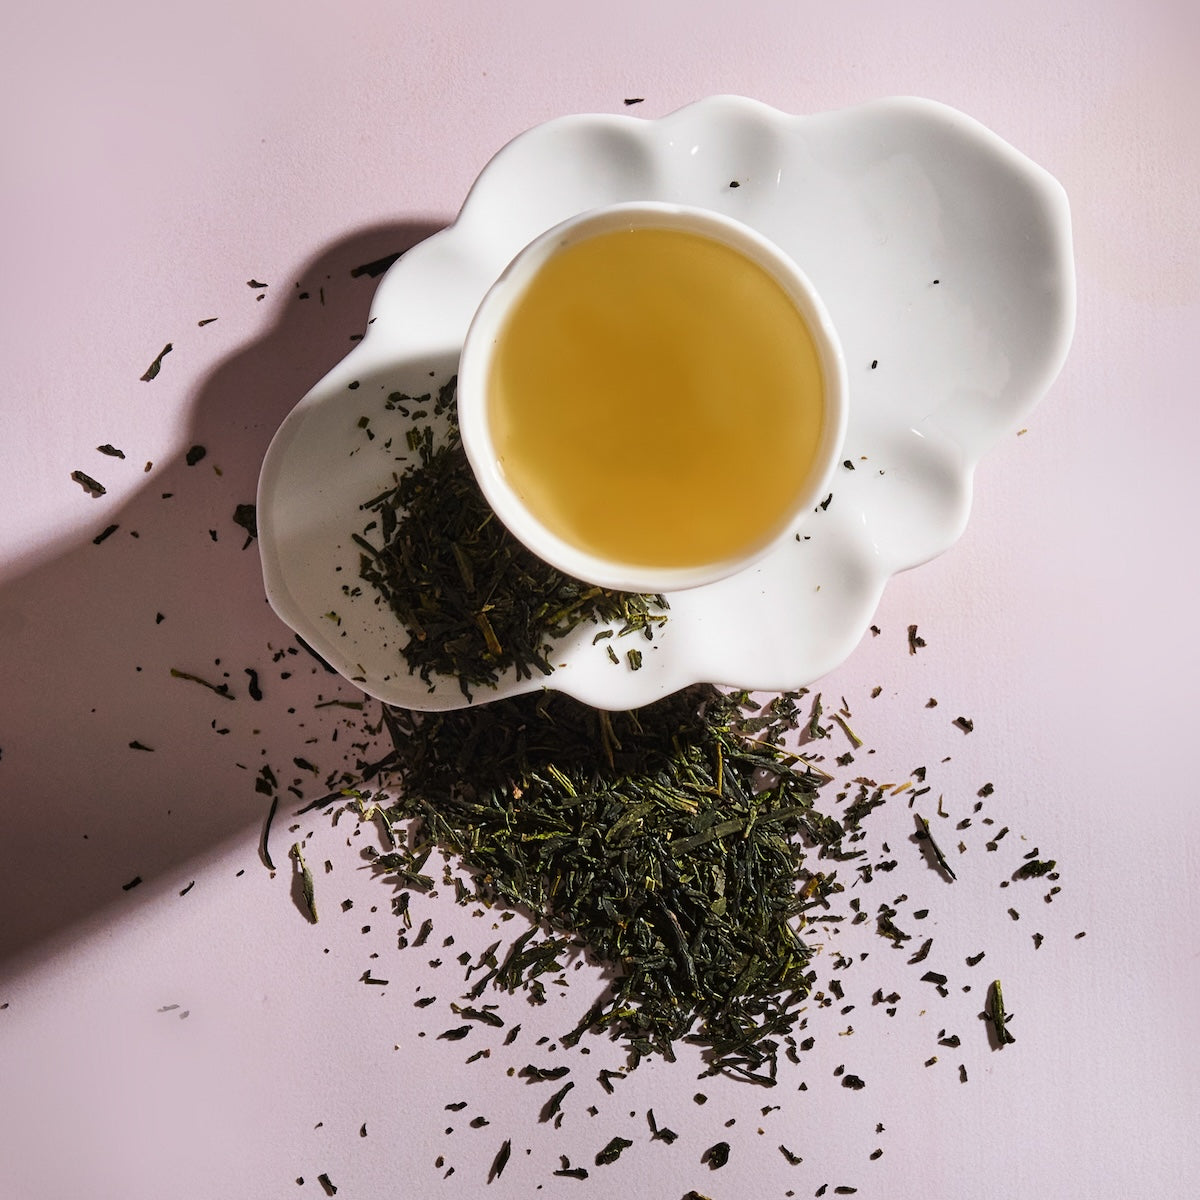 A white ceramic teacup filled with light Sencha Kyoto Green Tea rests on a uniquely shaped white saucer. Loose green tea leaves, rich in antioxidants and known to boost metabolism, are scattered around the saucer and teacup on a soft pink background. The image is well-lit, highlighting the texture of the leaves and the tea&#39;s color.